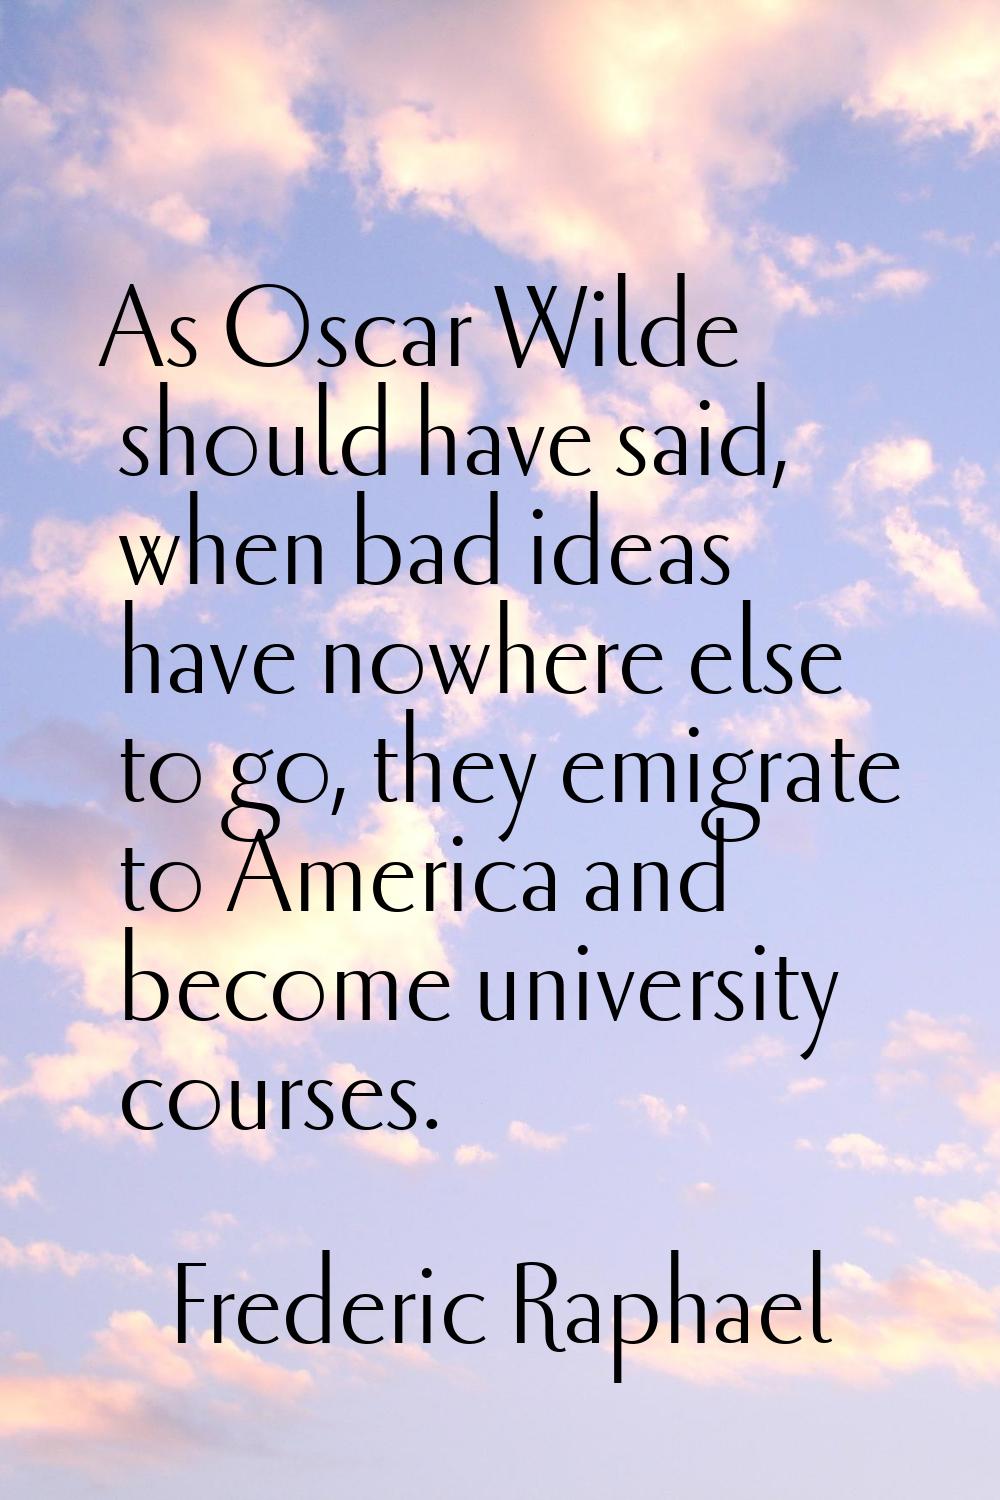 As Oscar Wilde should have said, when bad ideas have nowhere else to go, they emigrate to America a